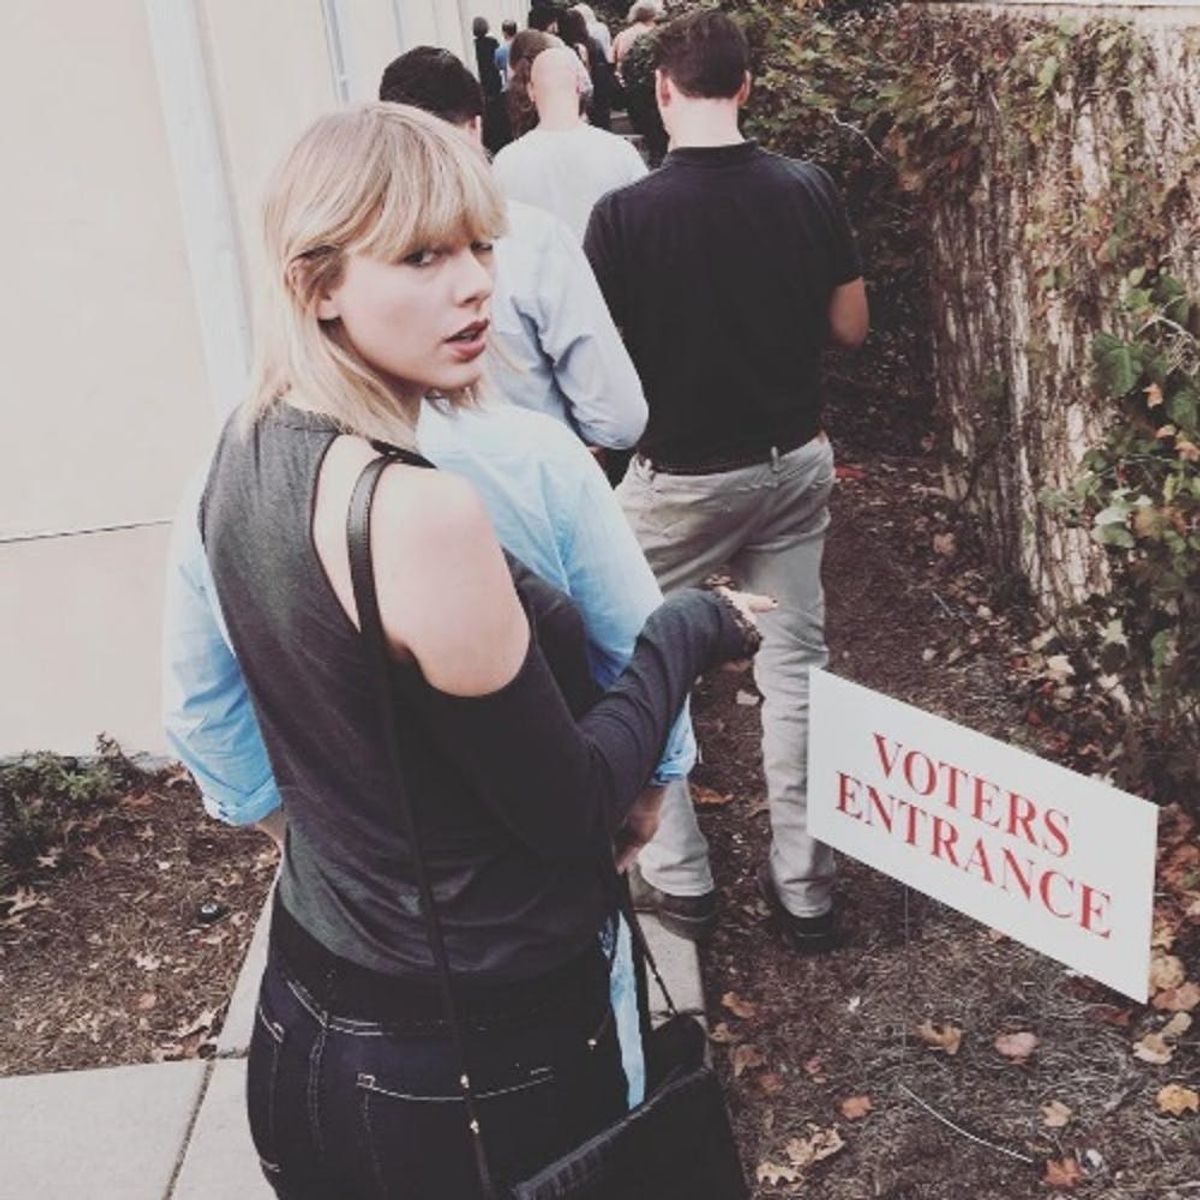 Check Out Celebs Saying #IVoted on #ElectionDay With Selfies